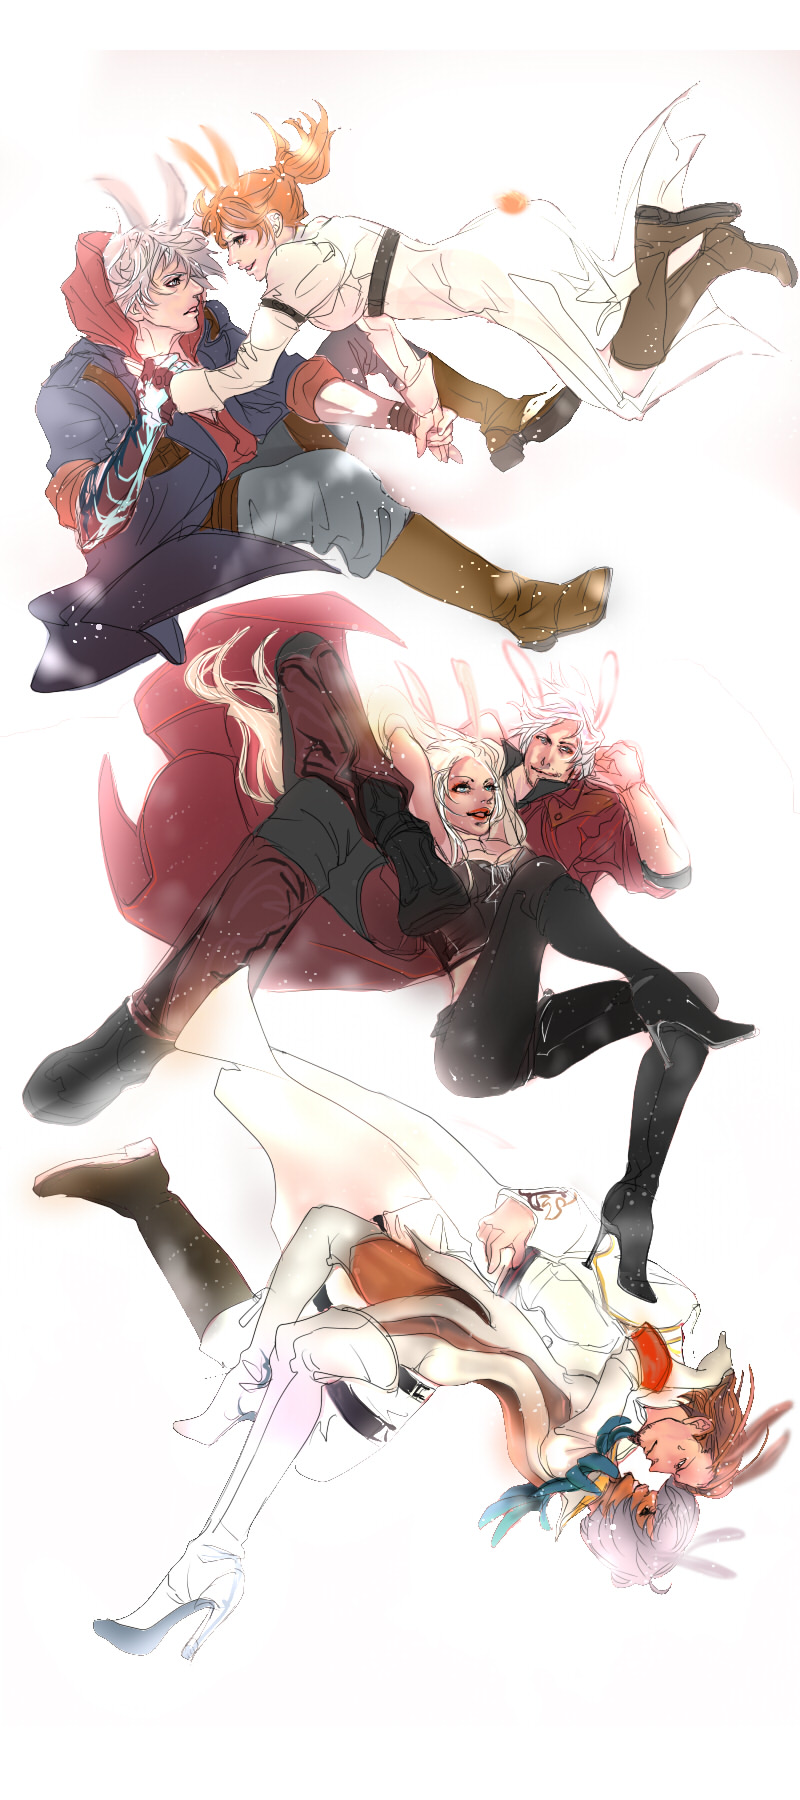 3girls animal_ears arms_up barocco blonde_hair boots brown_hair bunny_ears capcom corset credo dante dark_skin devil_may_cry devil_may_cry_4 dress dual_persona female gloria green_eyes grey_eyes hand_holding high_heels highres holding_hands hood hoodie kneehighs kyrie leather leather_pants long_hair long_image male multiple_boys multiple_girls nero nero_(devil_may_cry) open_mouth orange_eyes orange_hair pants shoes short_hair silver_hair simple_background tall_image trench_coat trenchcoat trish trish_(devil_may_cry) white_background white_boots